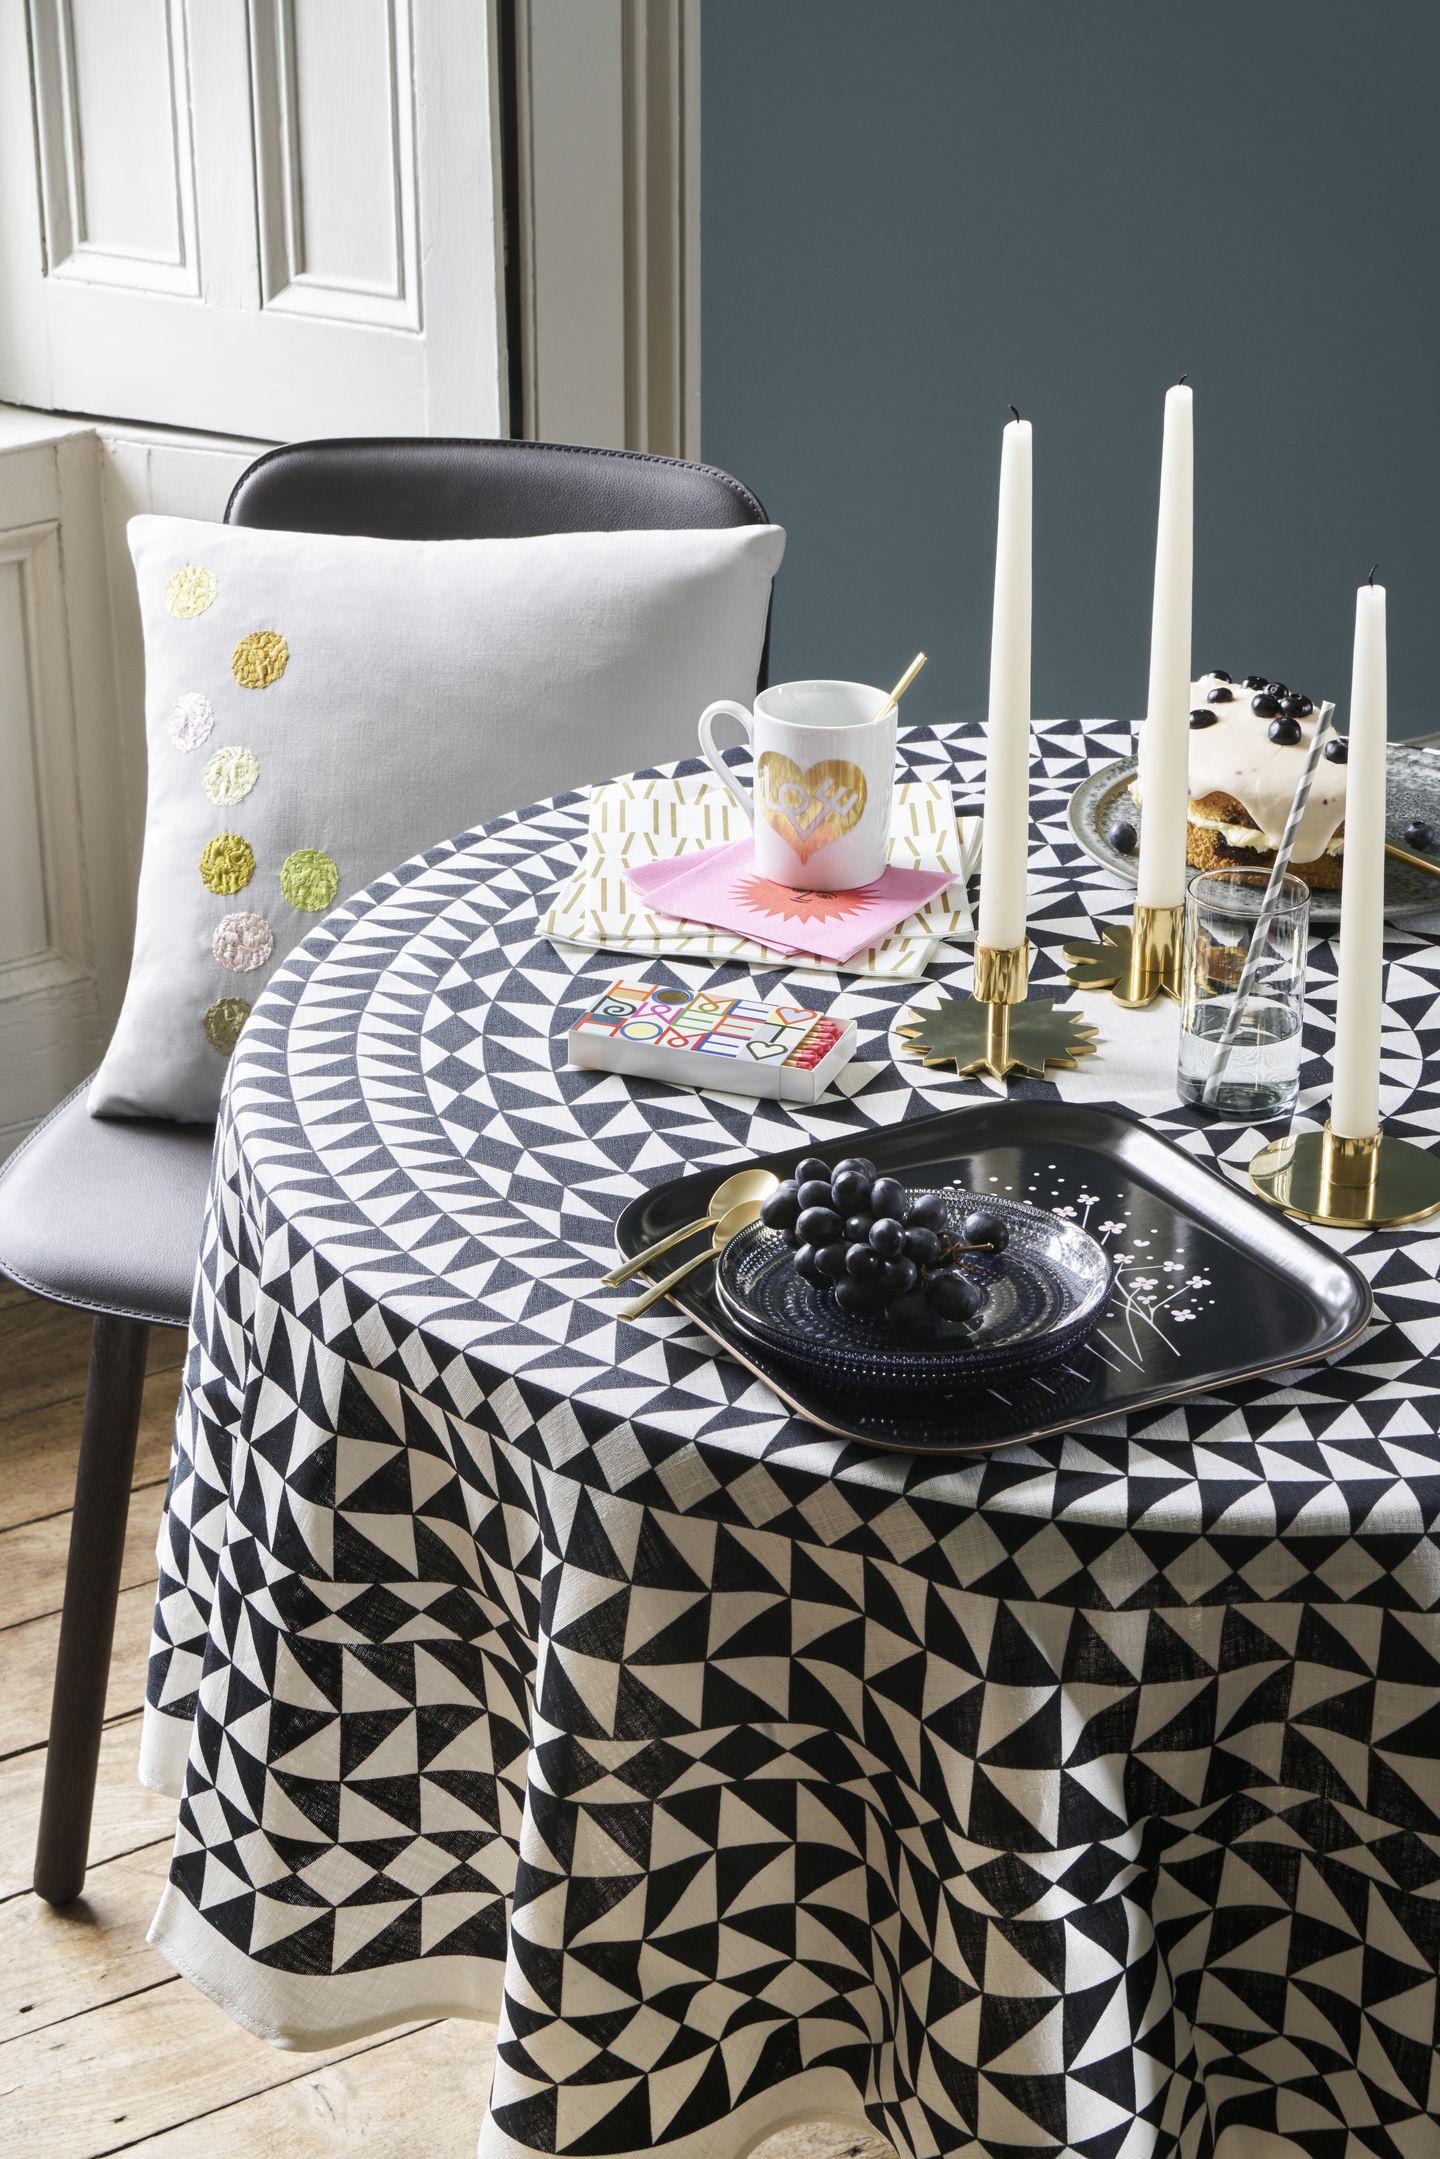 Cotton Vitra Round Geometric Tablecloth in Black by Alexander Girard  For Sale